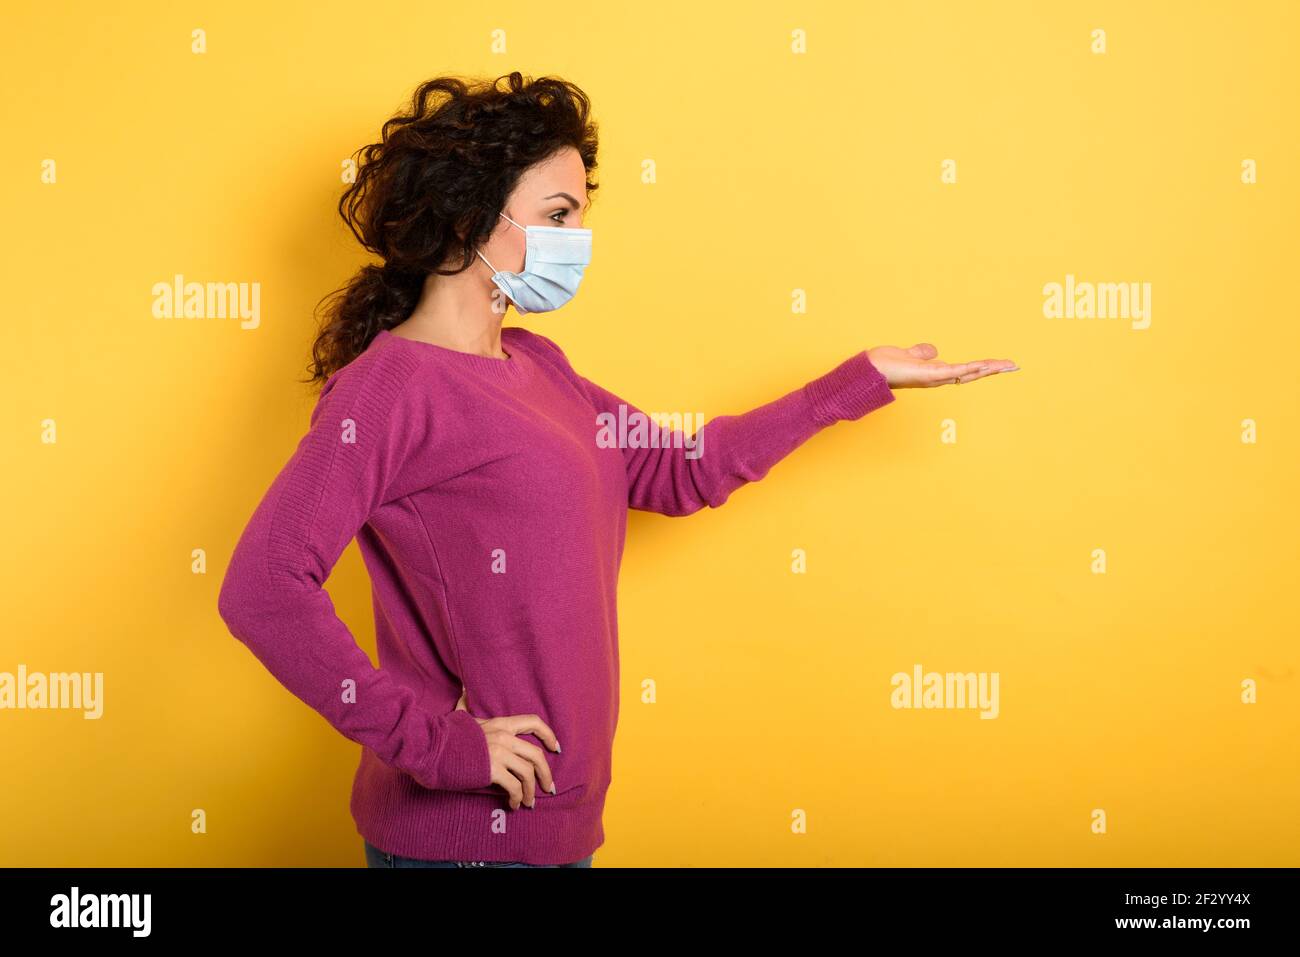 Pensive woman with face mask holds something in hand. yellow background Stock Photo